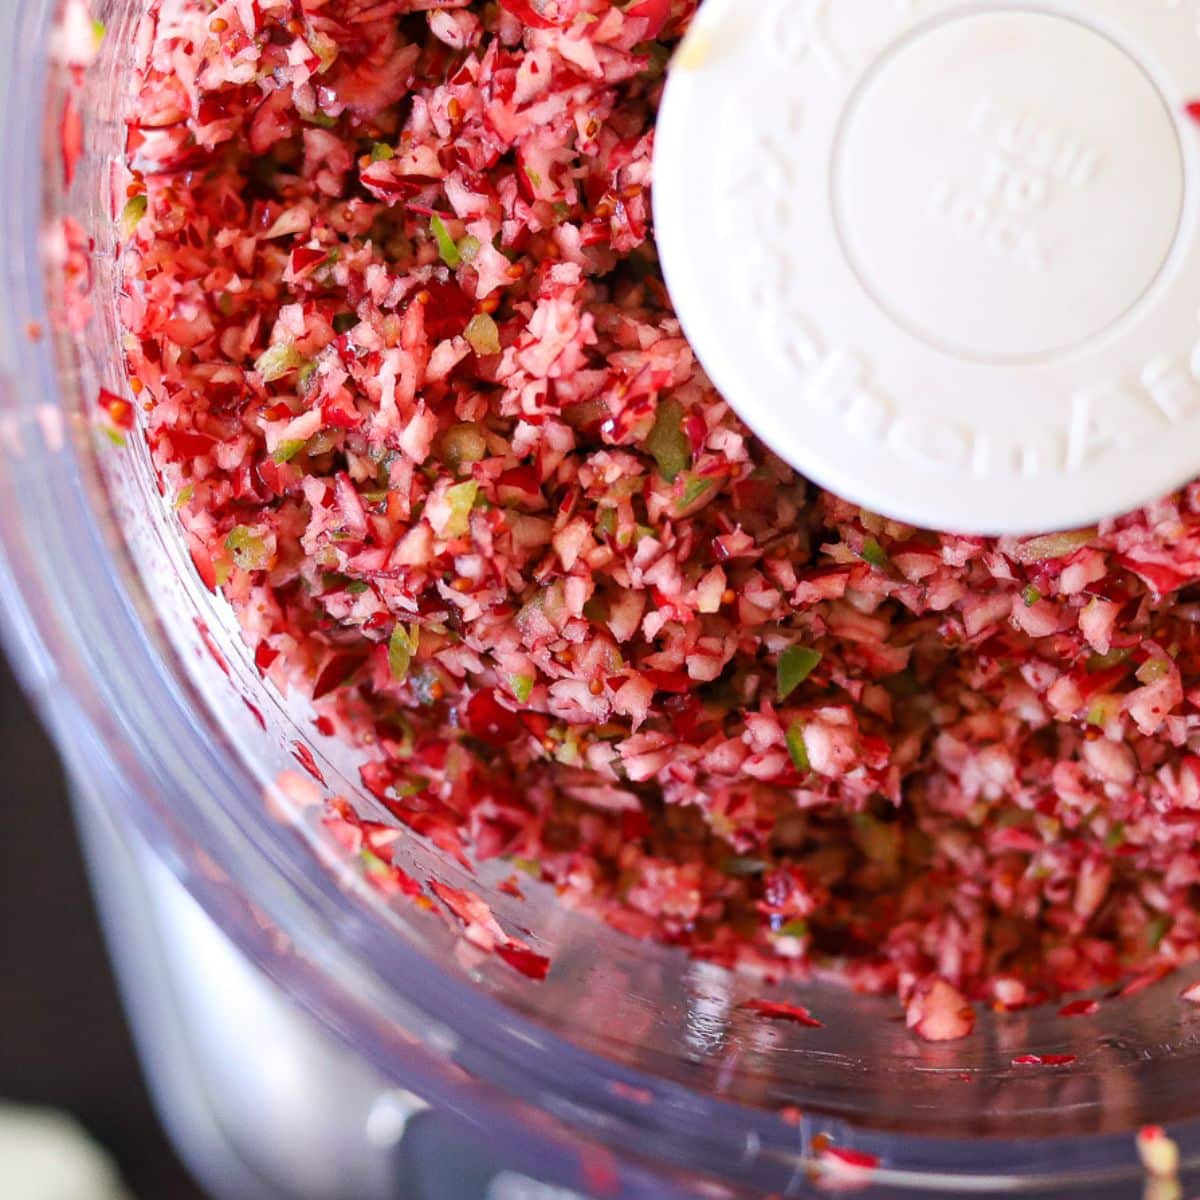 cranberries and jalapenos chopped up together in a food processor